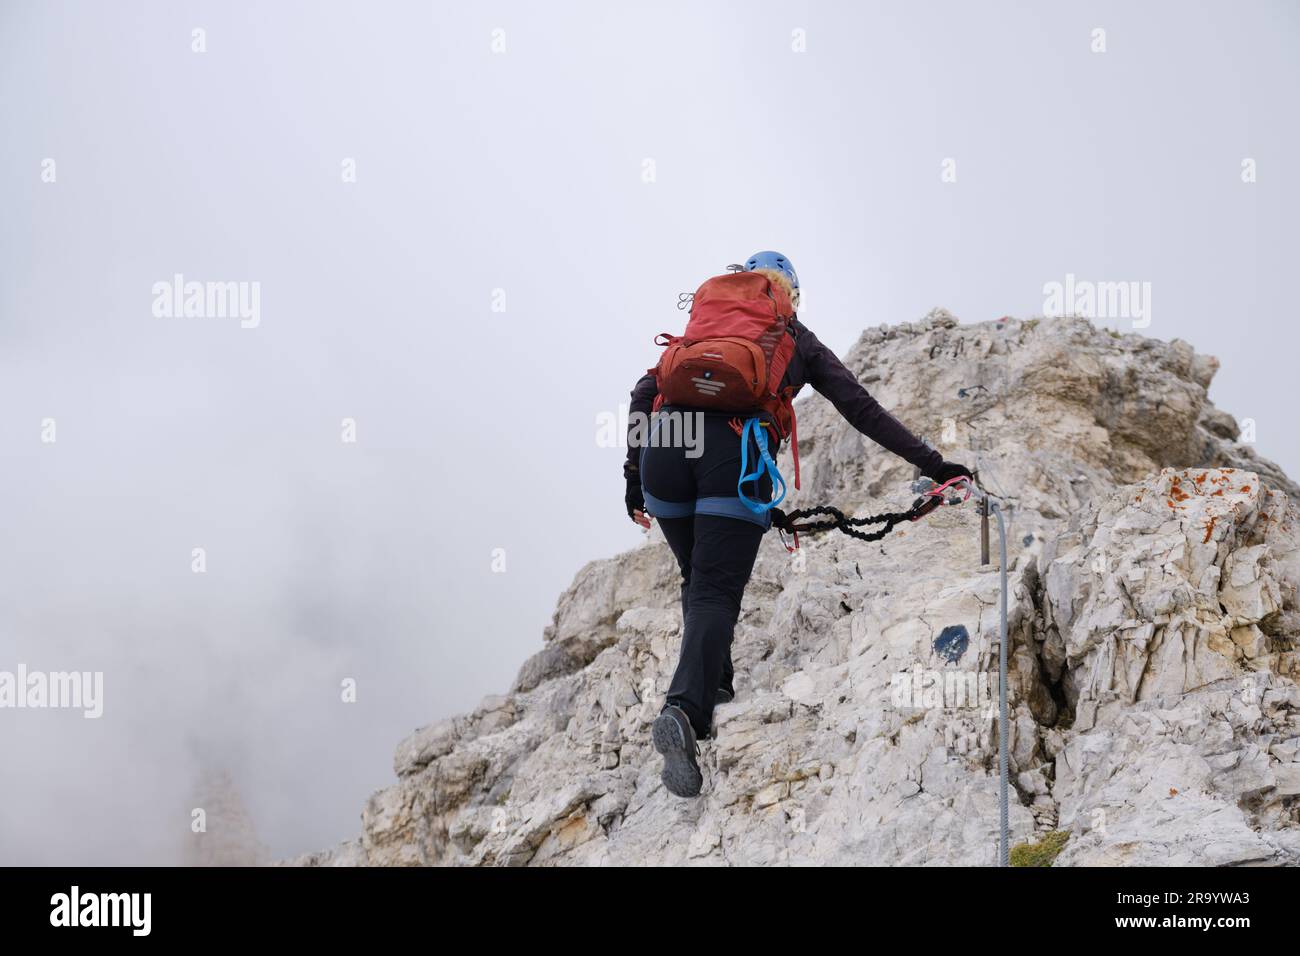 Active woman secured to via ferrata cable, advances on a route at Tofana di Mezzo, Dolomites, Italy, on a ridge surrounded by fog. Adventure, courage, Stock Photo